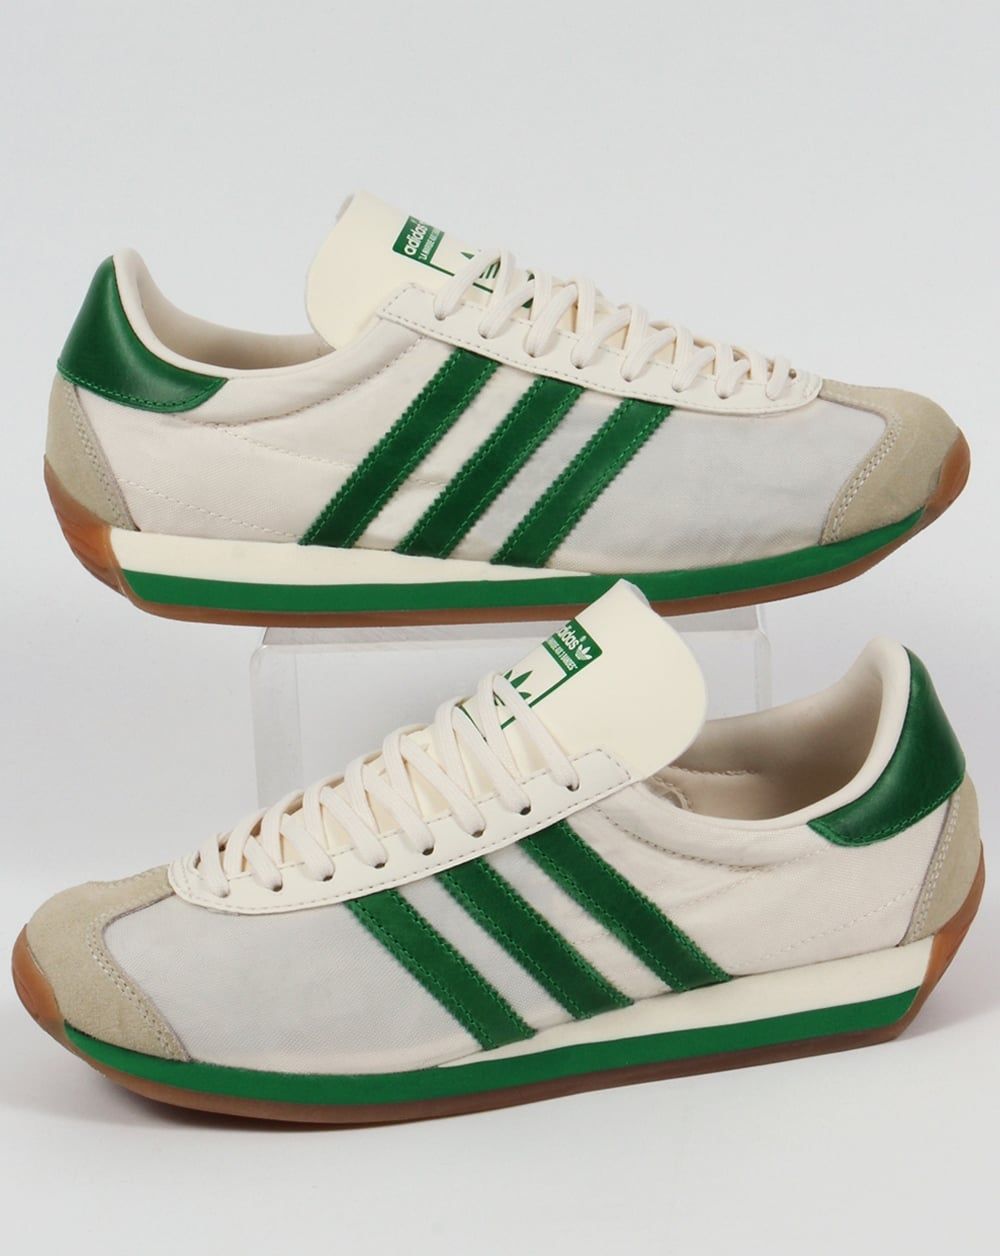 adidas-country-og-trainers-chalk-white-green-p5645-46802_image.jpg